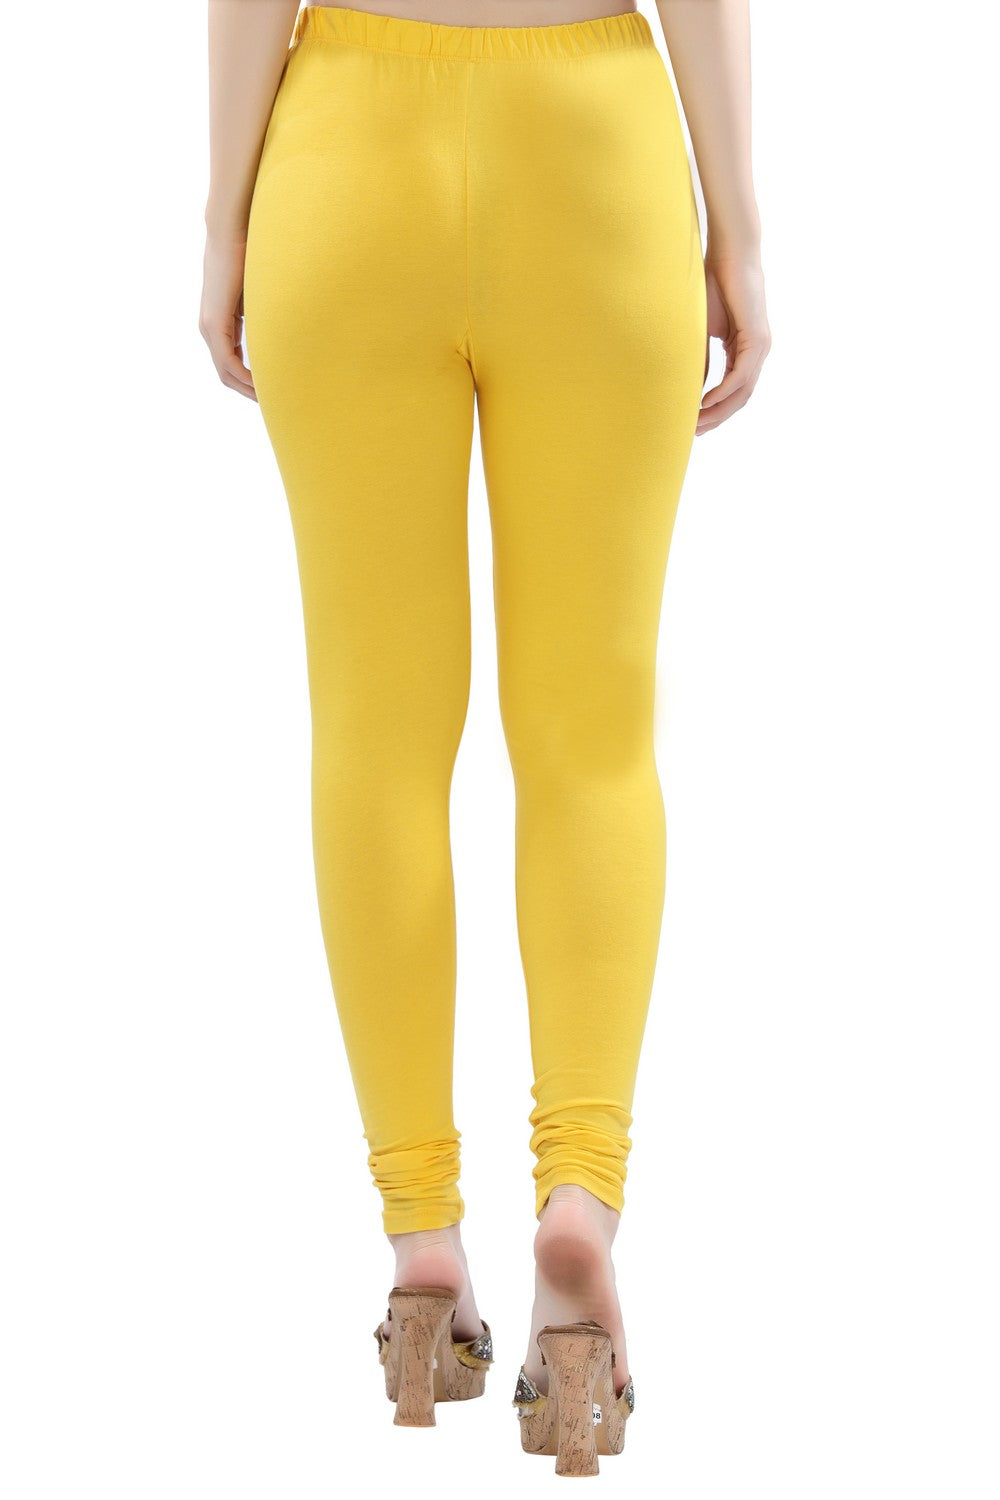 Indian Long Lasting, Breathable And Stretchable Cotton Pink Color Lycra  Leggings For Ladies at Best Price in Kotdwara | New Look Garment